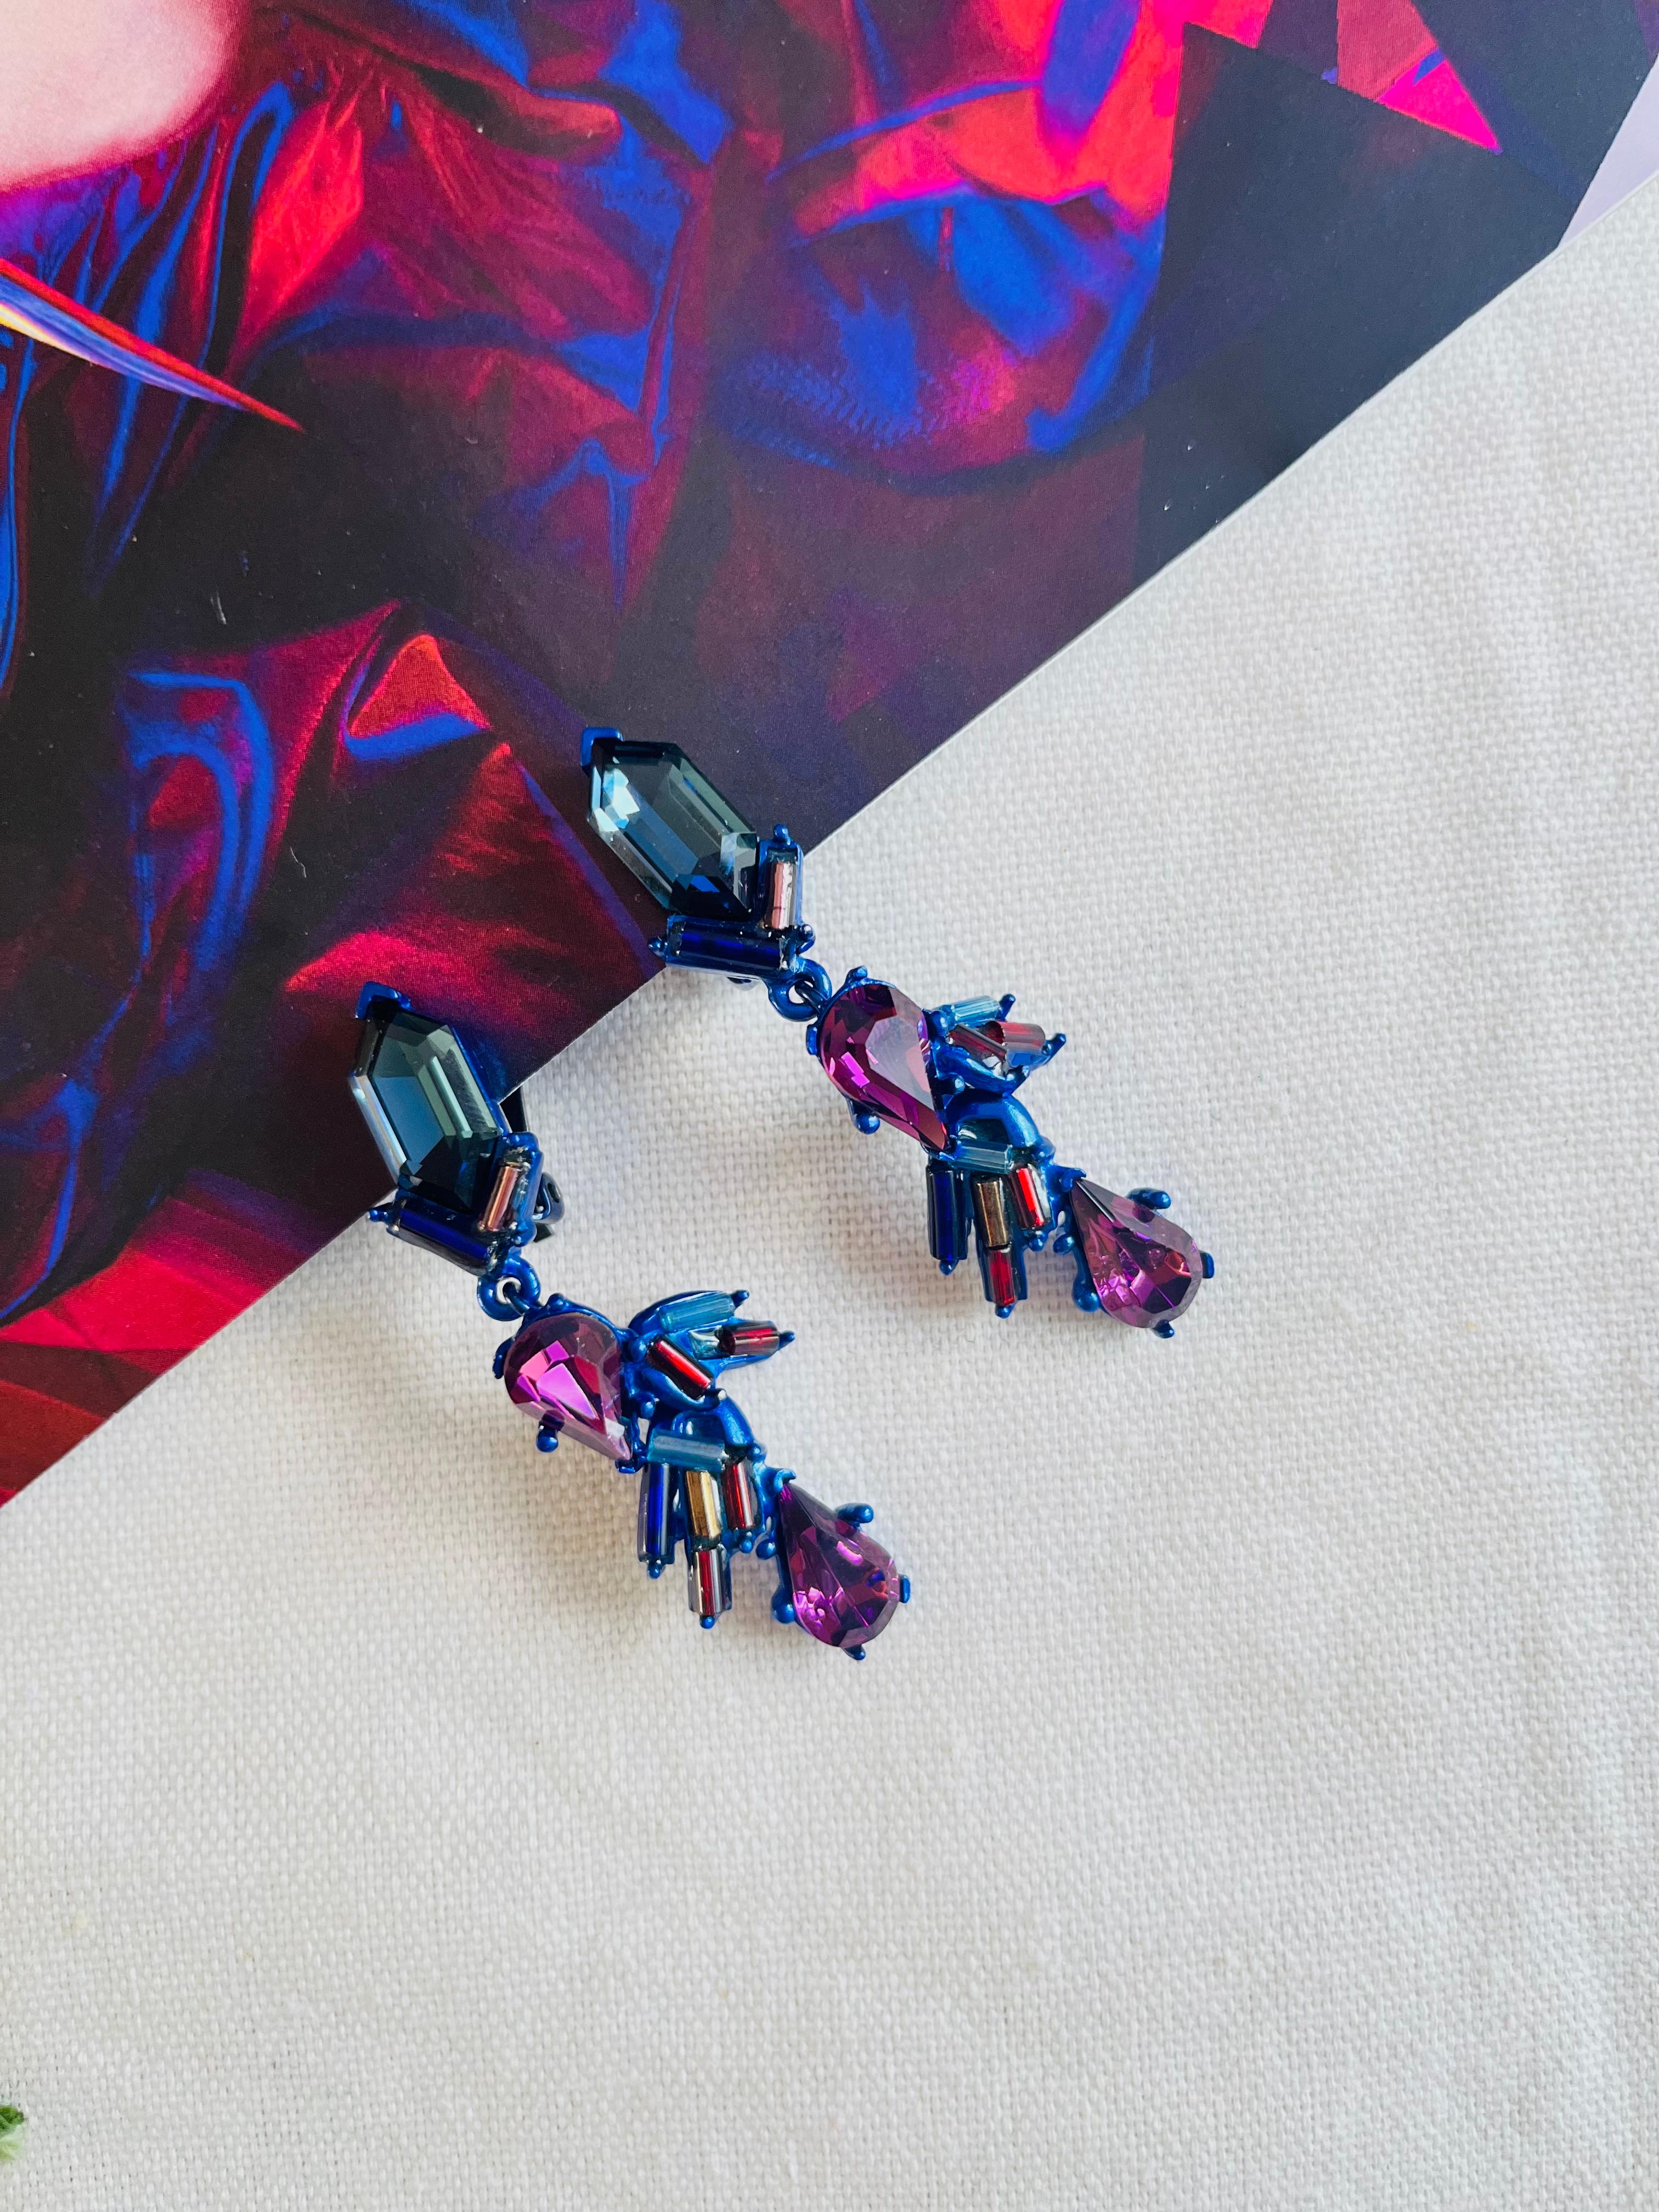 Very excellent condition. 100% Genuine. 

CHRISTIAN LACROIX vintage earrings featuring massive purple crystals with iridescent rocaille beads.

Size: 5.5*1.6 cm.

Weight: 11.0 g/each.

_ _ _

Great for everyday wear. Come with velvet pouch and